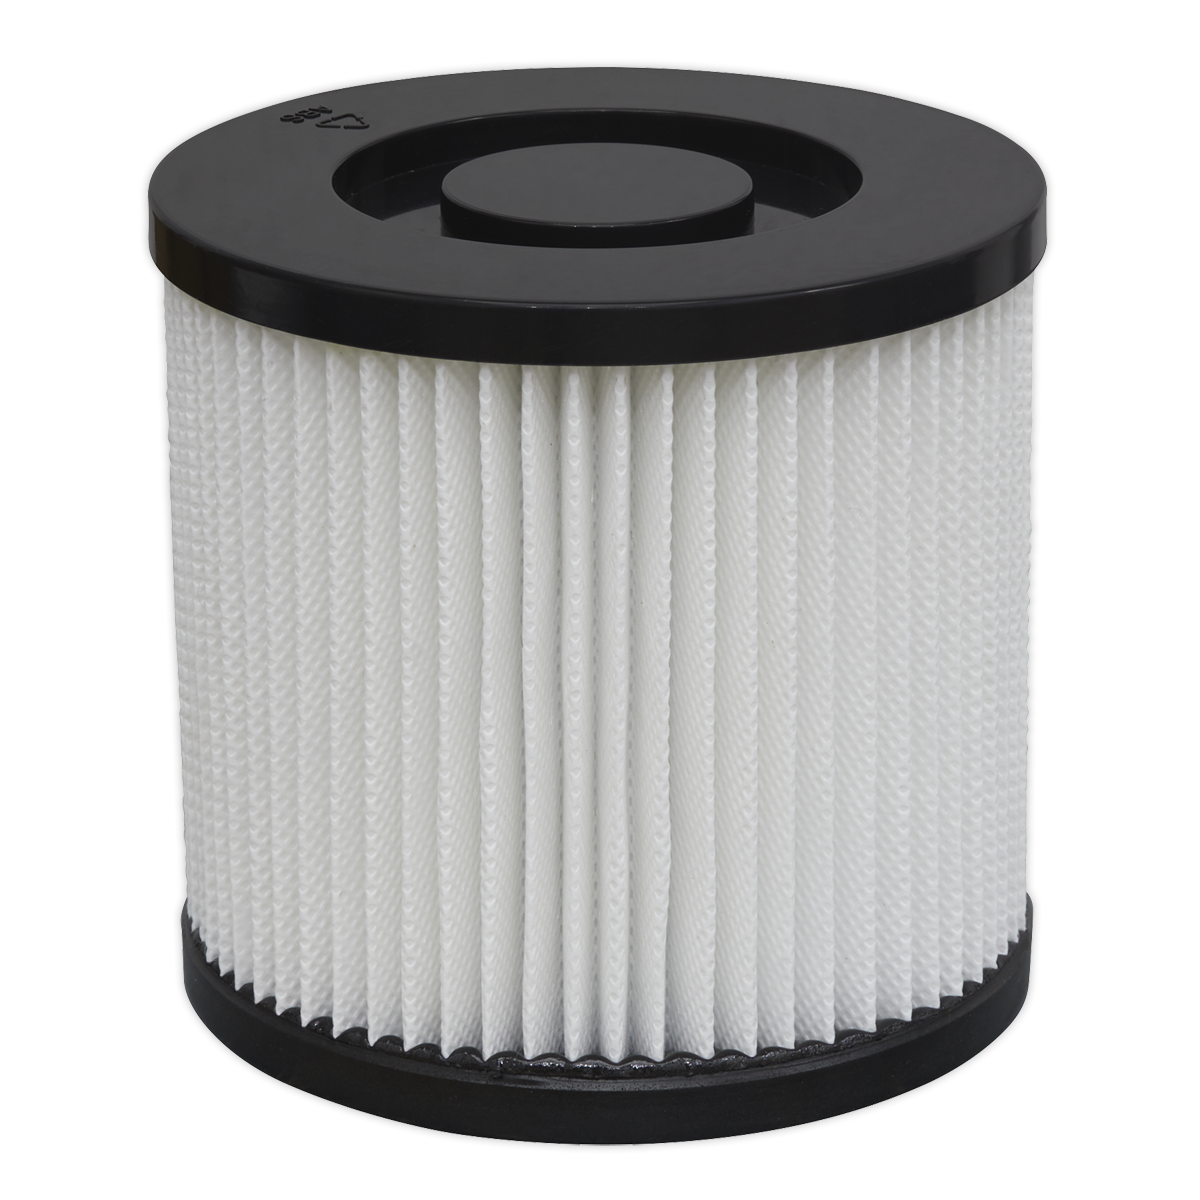 Sealey Locking Cartridge Filter for PC195SD PC195SDCFL